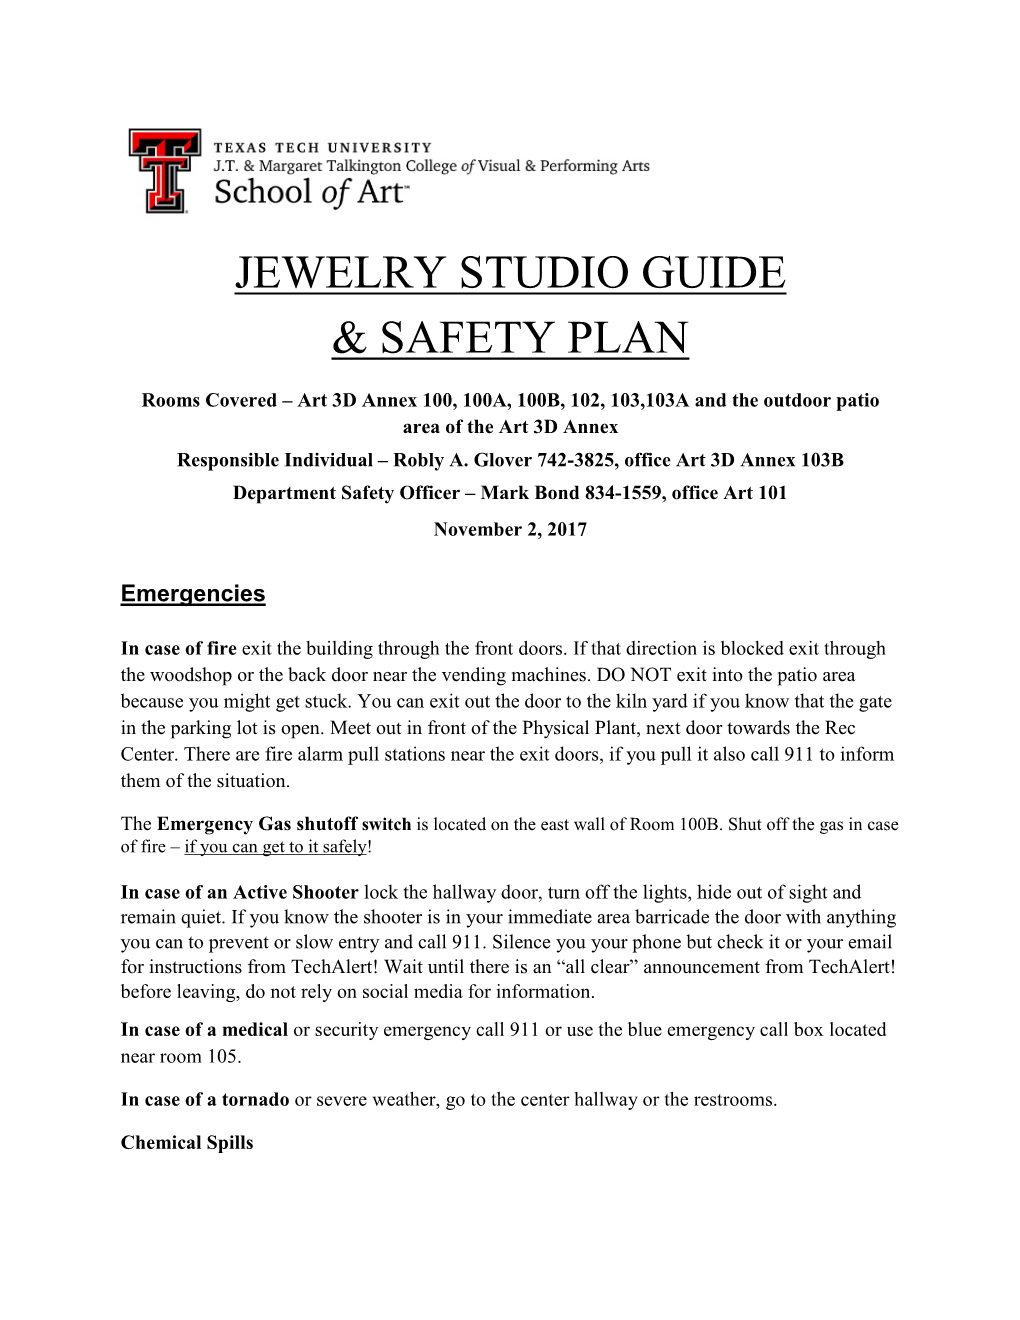 Jewelry Studio Guide & Safety Plan